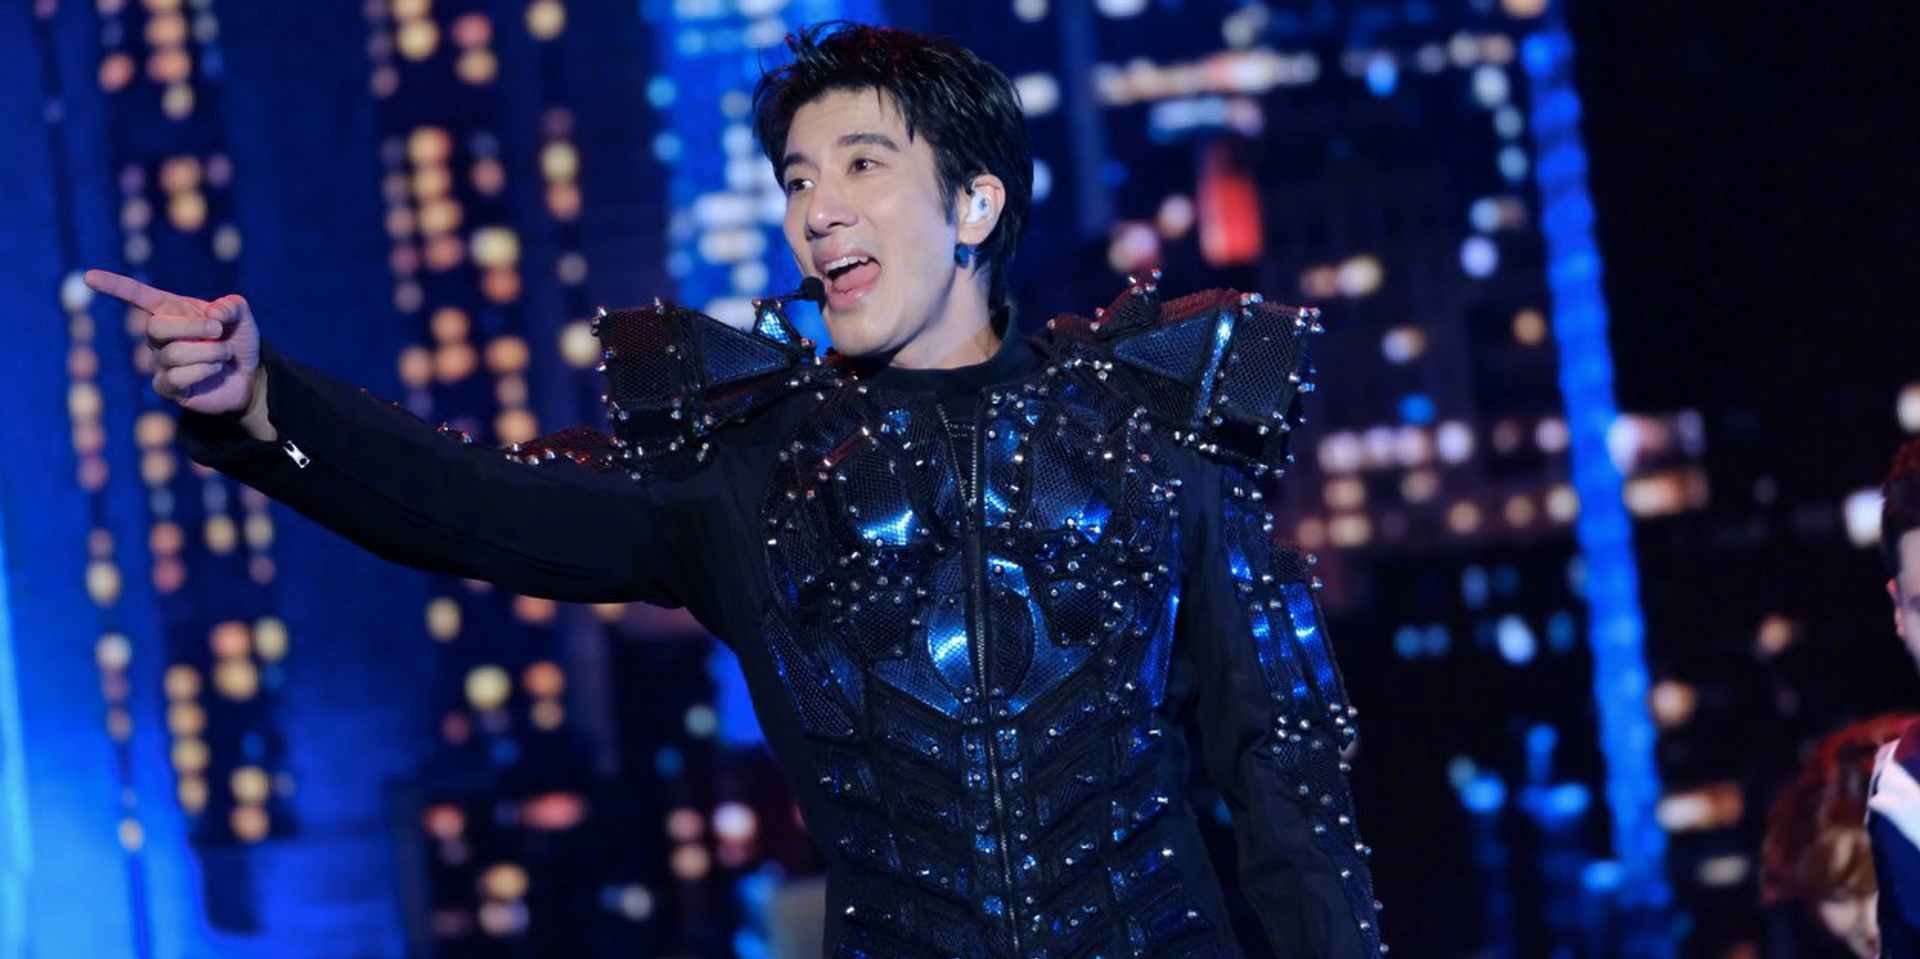 Mandpop star Wang Leehom in two months and counting self-quarantine after performing in Wuhan